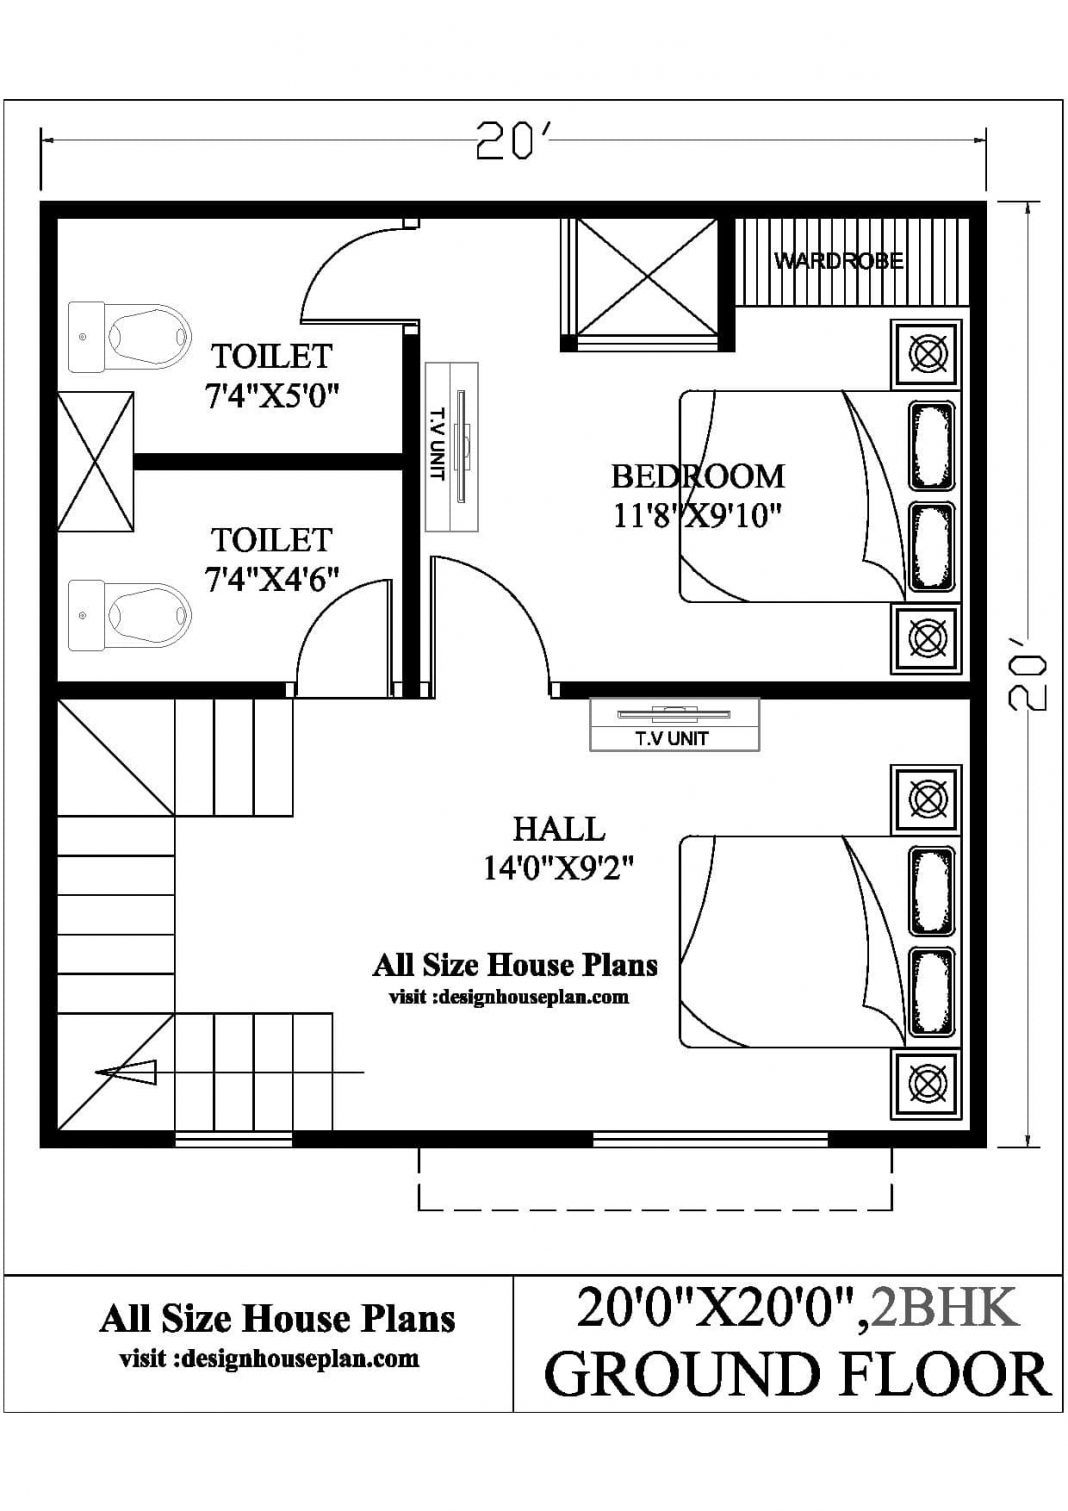 20 By 20 House Plan | Best 2bhk house plan | 20x20 House Plans 400 sqft